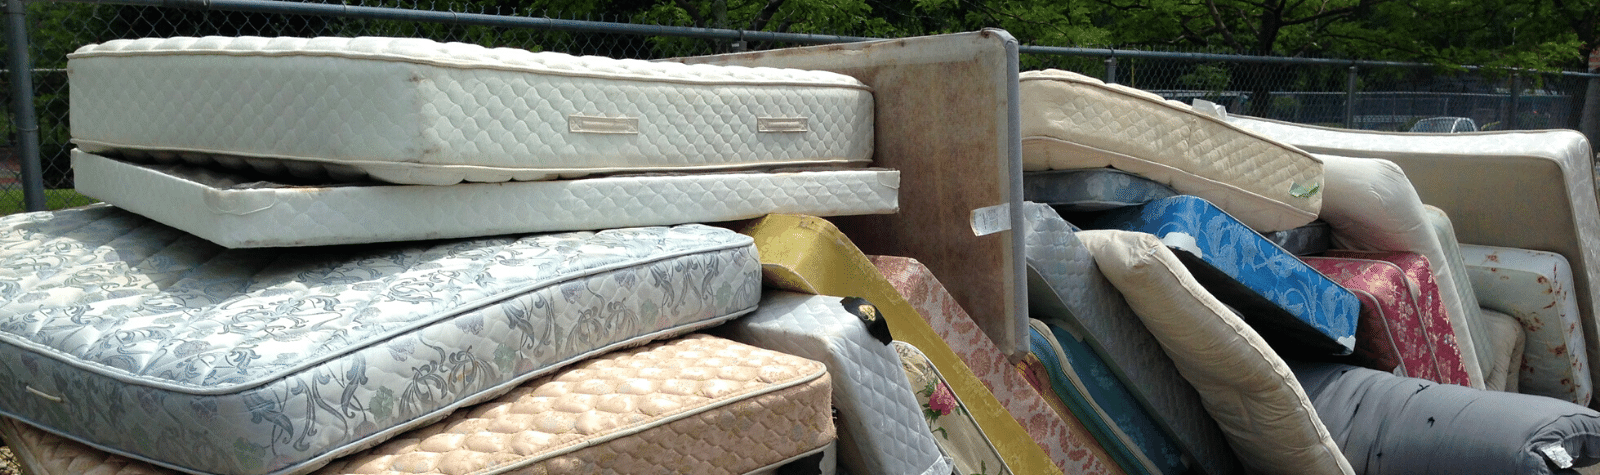 Recycling and Proper Disposal Keeps Mattresses Out of Landfills